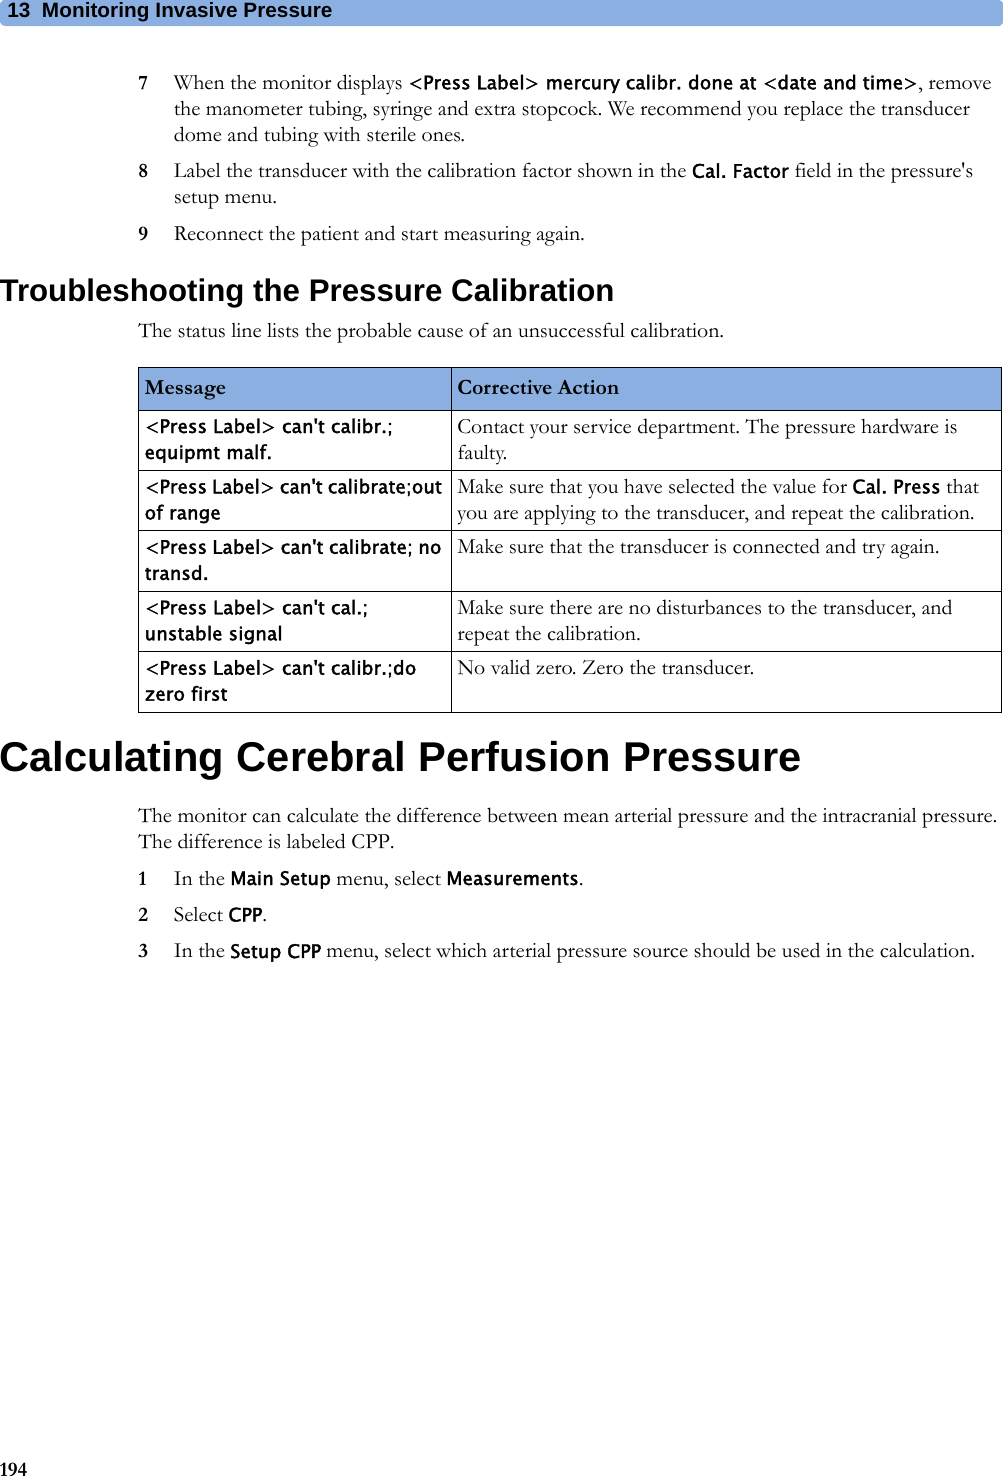 13 Monitoring Invasive Pressure1947When the monitor displays &lt;Press Label&gt; mercury calibr. done at &lt;date and time&gt;, remove the manometer tubing, syringe and extra stopcock. We recommend you replace the transducer dome and tubing with sterile ones.8Label the transducer with the calibration factor shown in the Cal. Factor field in the pressure&apos;s setup menu.9Reconnect the patient and start measuring again.Troubleshooting the Pressure CalibrationThe status line lists the probable cause of an unsuccessful calibration.Calculating Cerebral Perfusion PressureThe monitor can calculate the difference between mean arterial pressure and the intracranial pressure. The difference is labeled CPP.1In the Main Setup menu, select Measurements.2Select CPP.3In the Setup CPP menu, select which arterial pressure source should be used in the calculation.Message Corrective Action&lt;Press Label&gt; can&apos;t calibr.; equipmt malf.Contact your service department. The pressure hardware is faulty.&lt;Press Label&gt; can&apos;t calibrate;out of rangeMake sure that you have selected the value for Cal. Press that you are applying to the transducer, and repeat the calibration.&lt;Press Label&gt; can&apos;t calibrate; no transd.Make sure that the transducer is connected and try again.&lt;Press Label&gt; can&apos;t cal.; unstable signalMake sure there are no disturbances to the transducer, and repeat the calibration.&lt;Press Label&gt; can&apos;t calibr.;do zero firstNo valid zero. Zero the transducer.